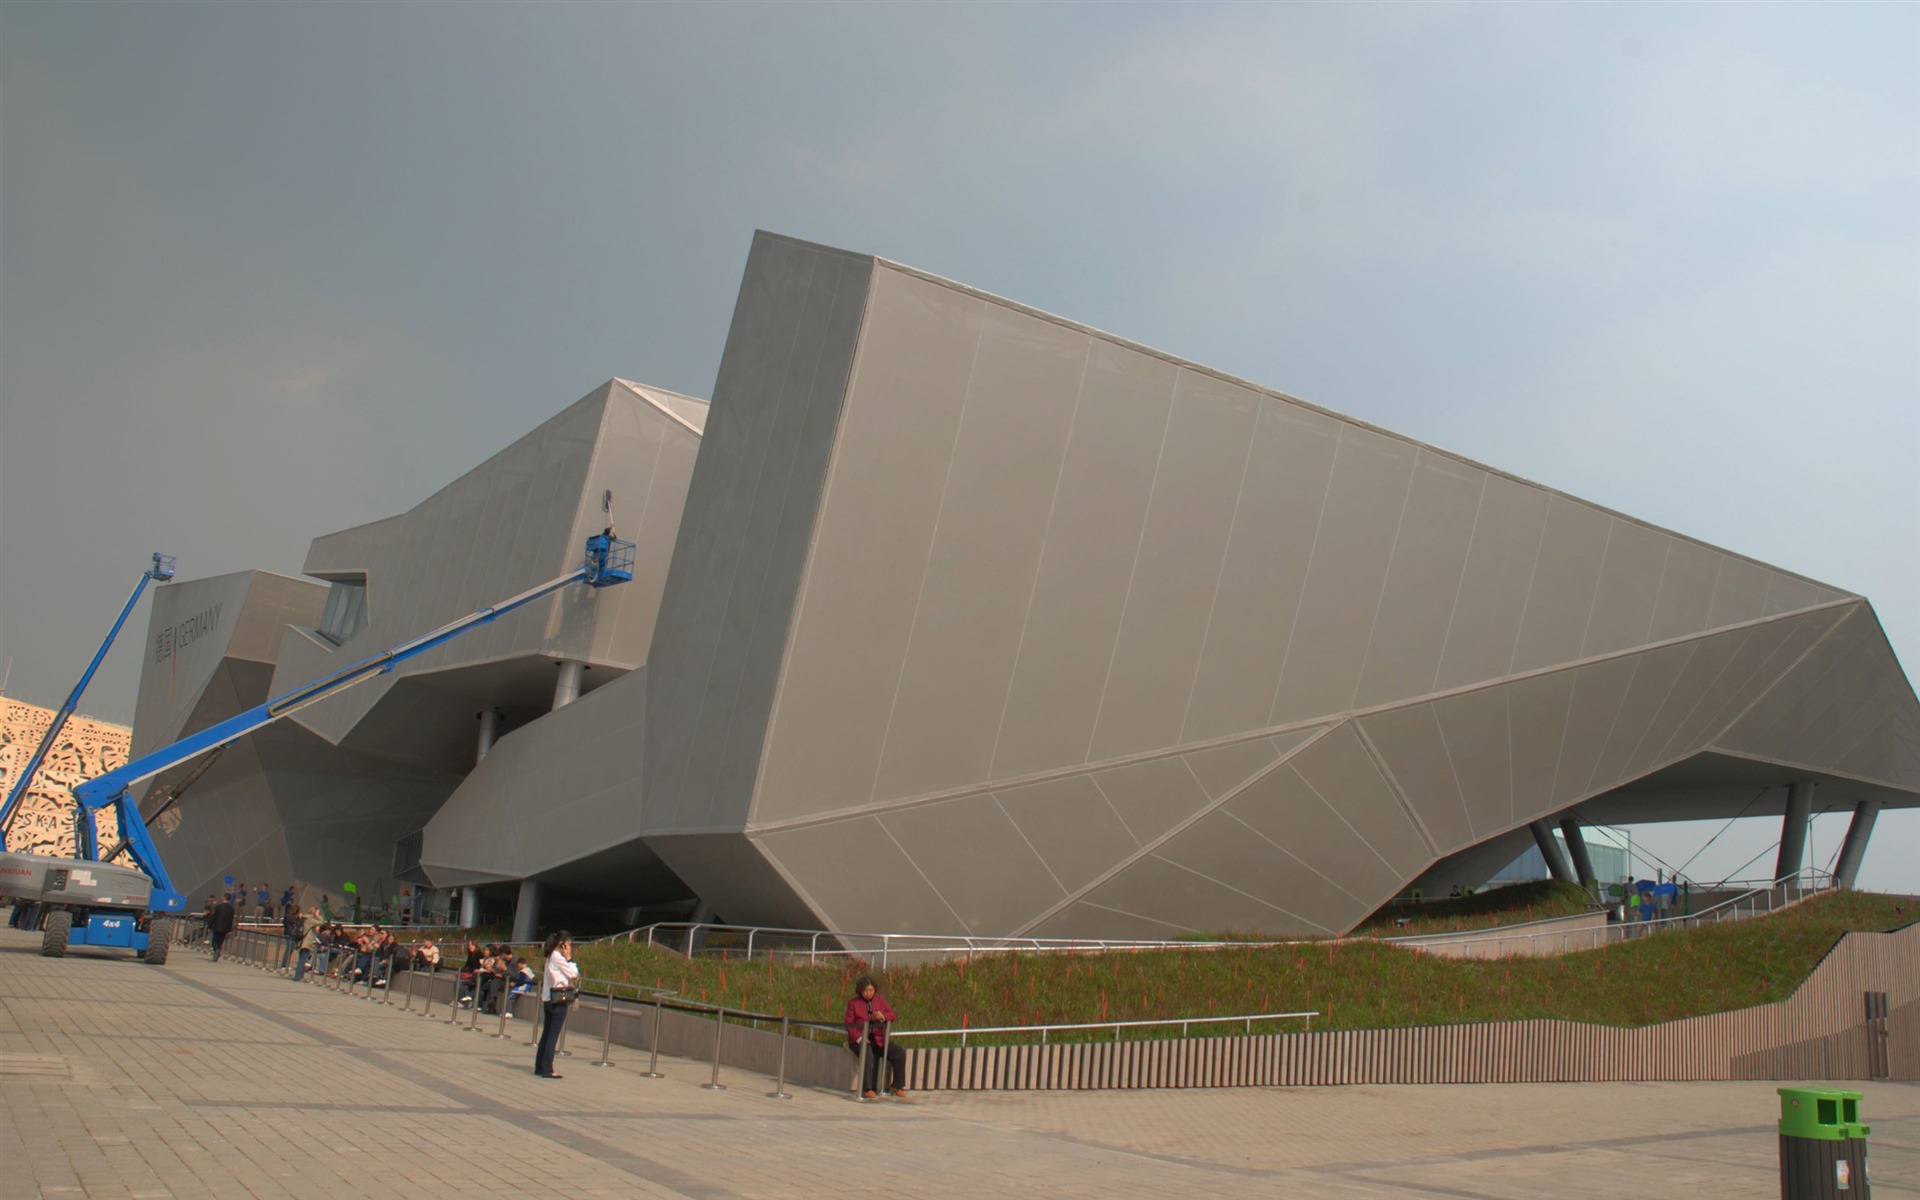 Commissioning of the 2010 Shanghai World Expo (studious works) #21 - 1920x1200